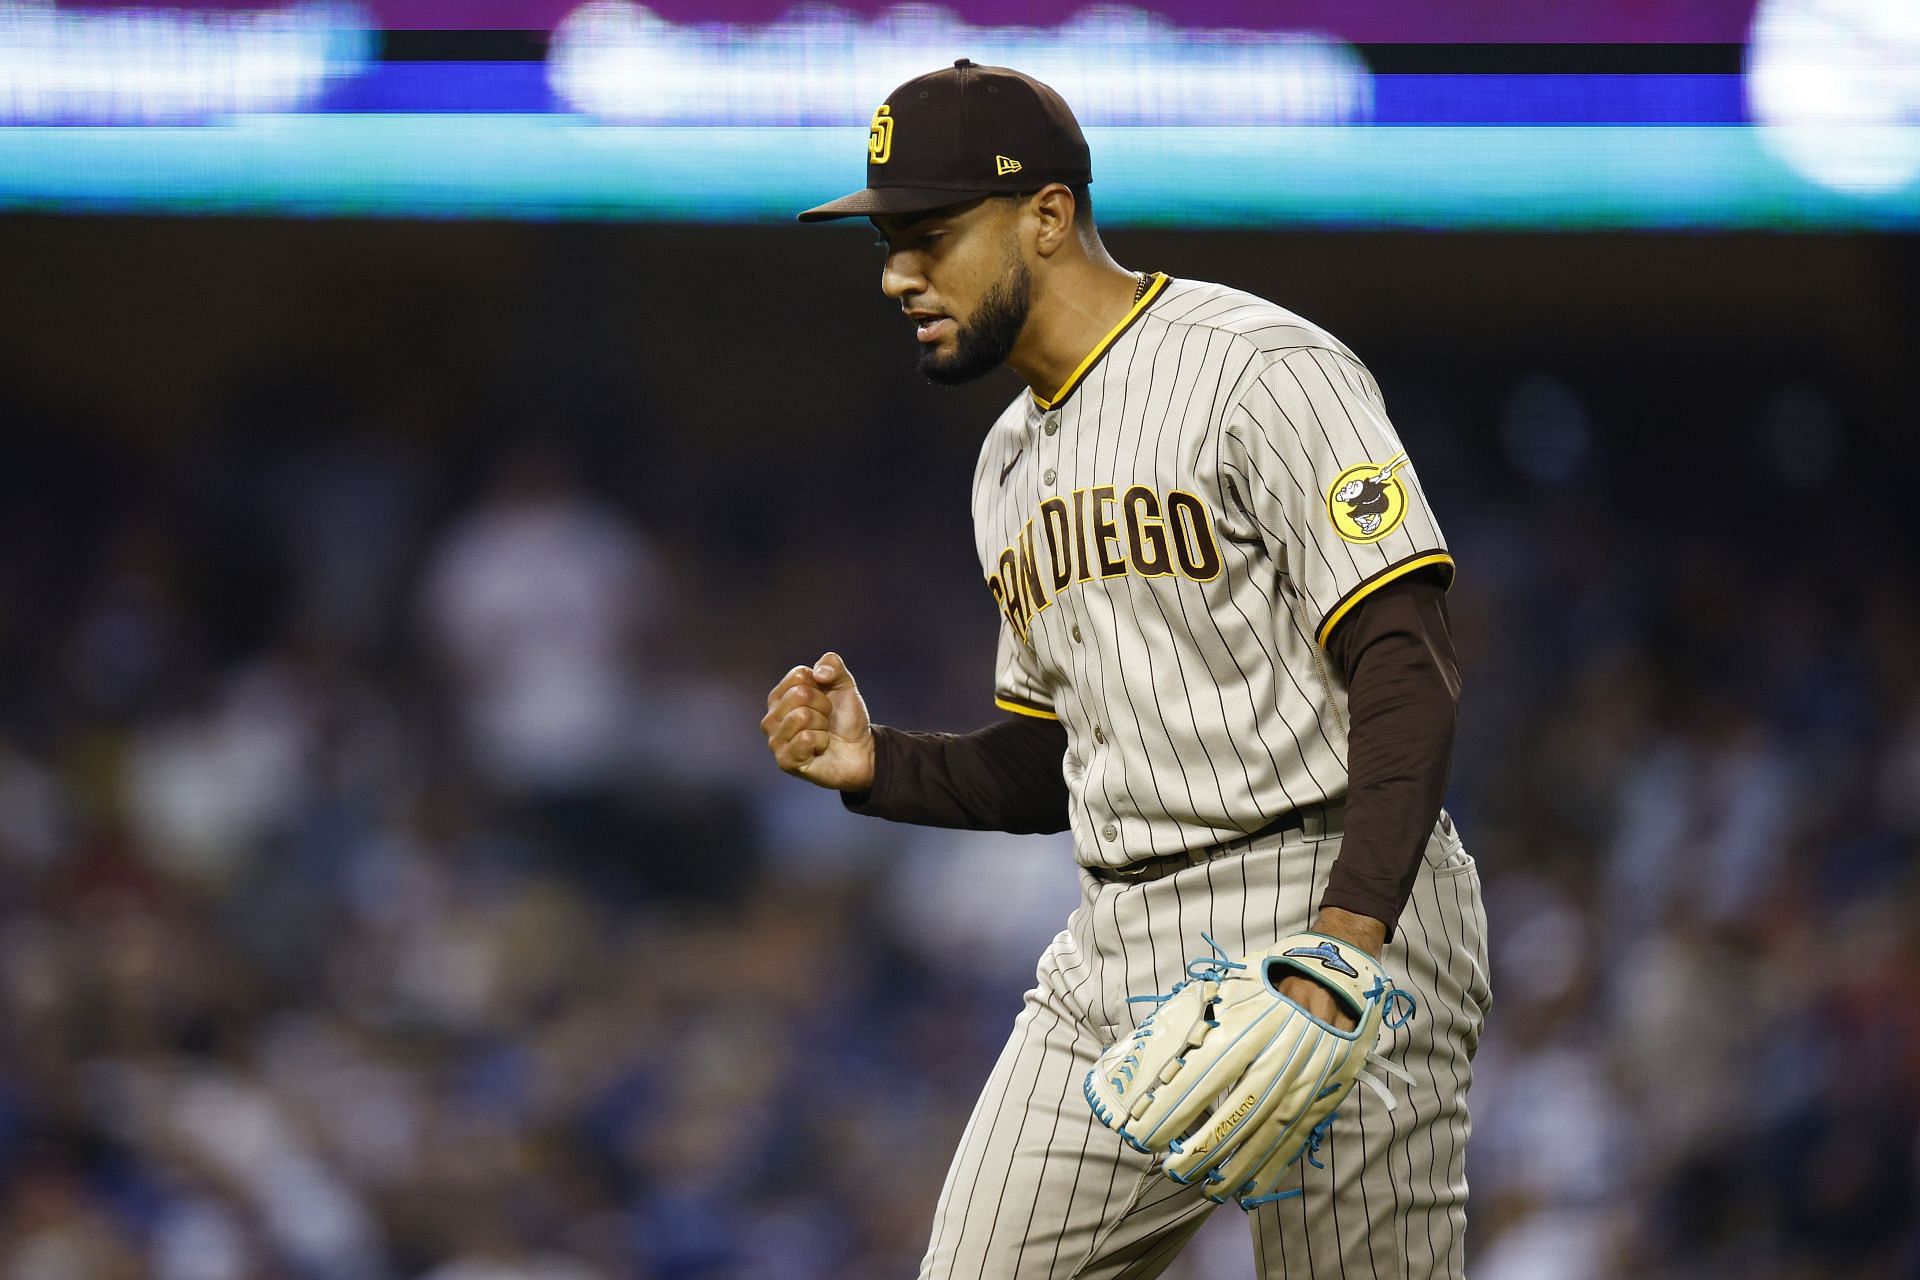 The Padres Spent Big on Players—Then Lost the TV Deal That Helps